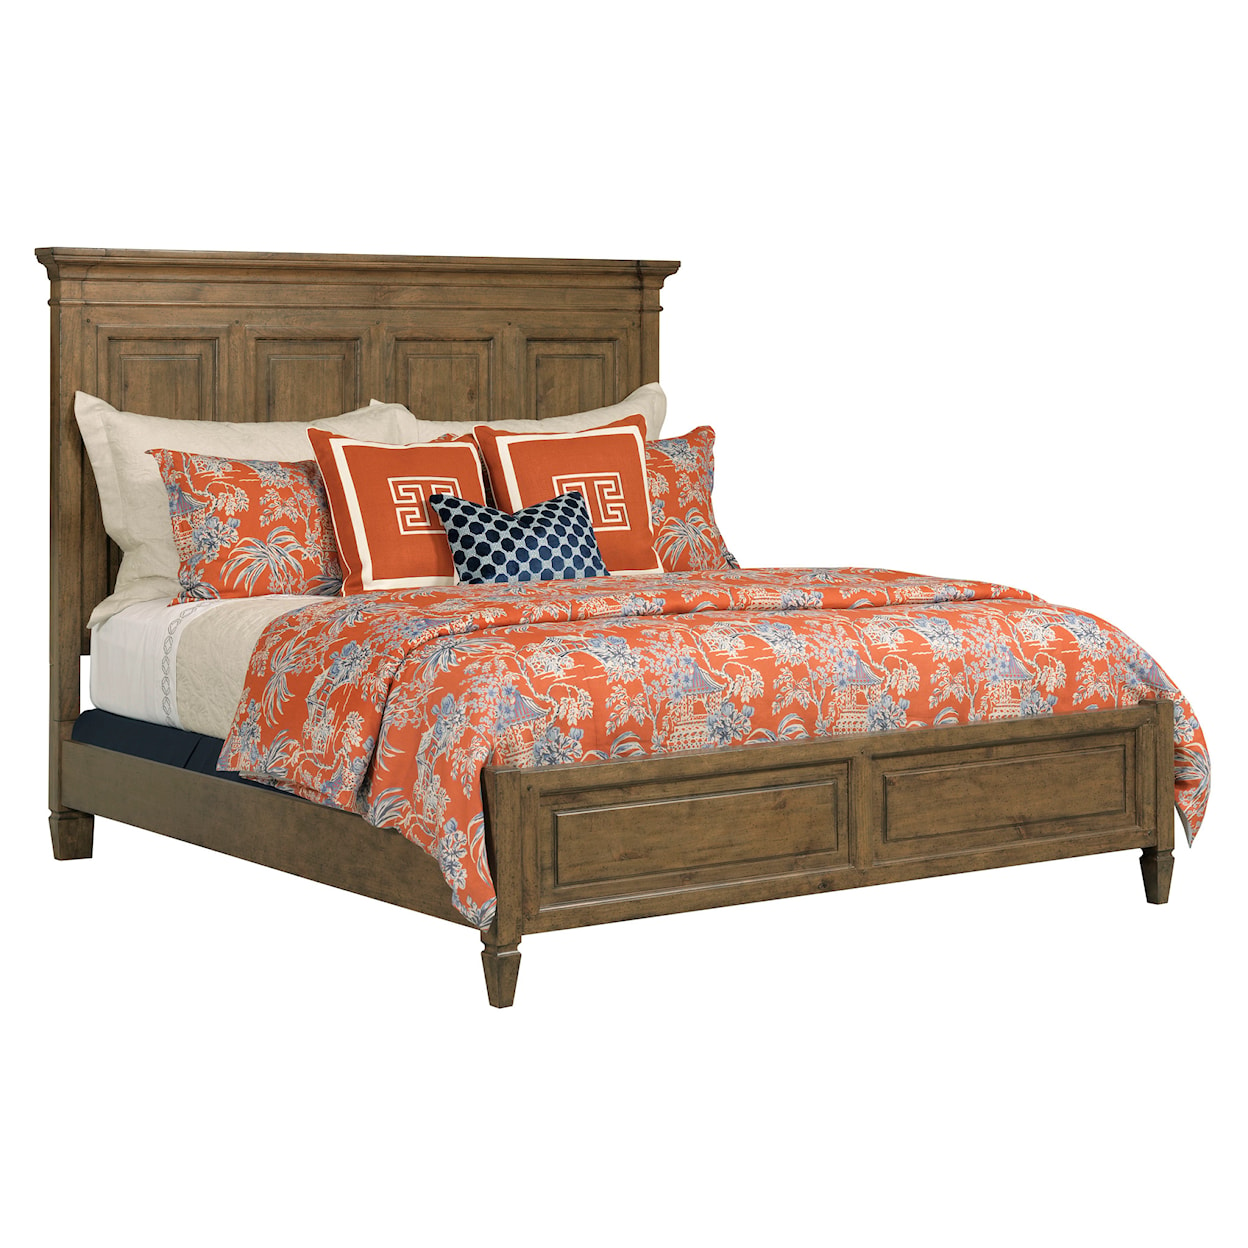 Kincaid Furniture Ansley Hartnell Queen Panel Bed 